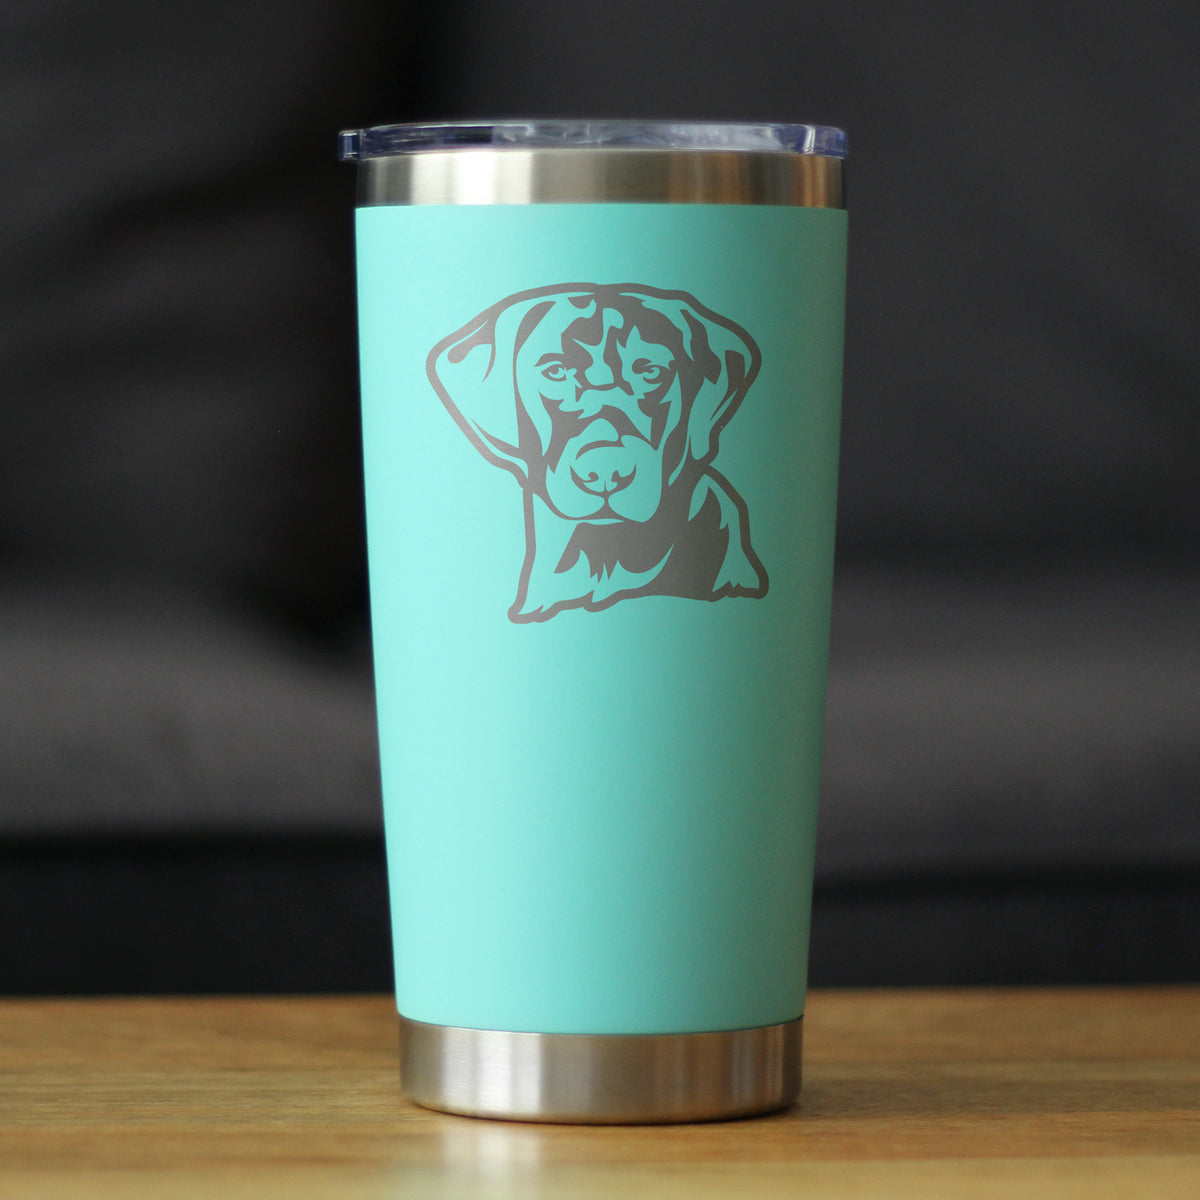 Black Lab Face - Labrador Retriever - Insulated Coffee Tumbler Cup with Sliding Lid - Stainless Steel Insulated Mug - Fun Unique Dog Themed Decor Gifts